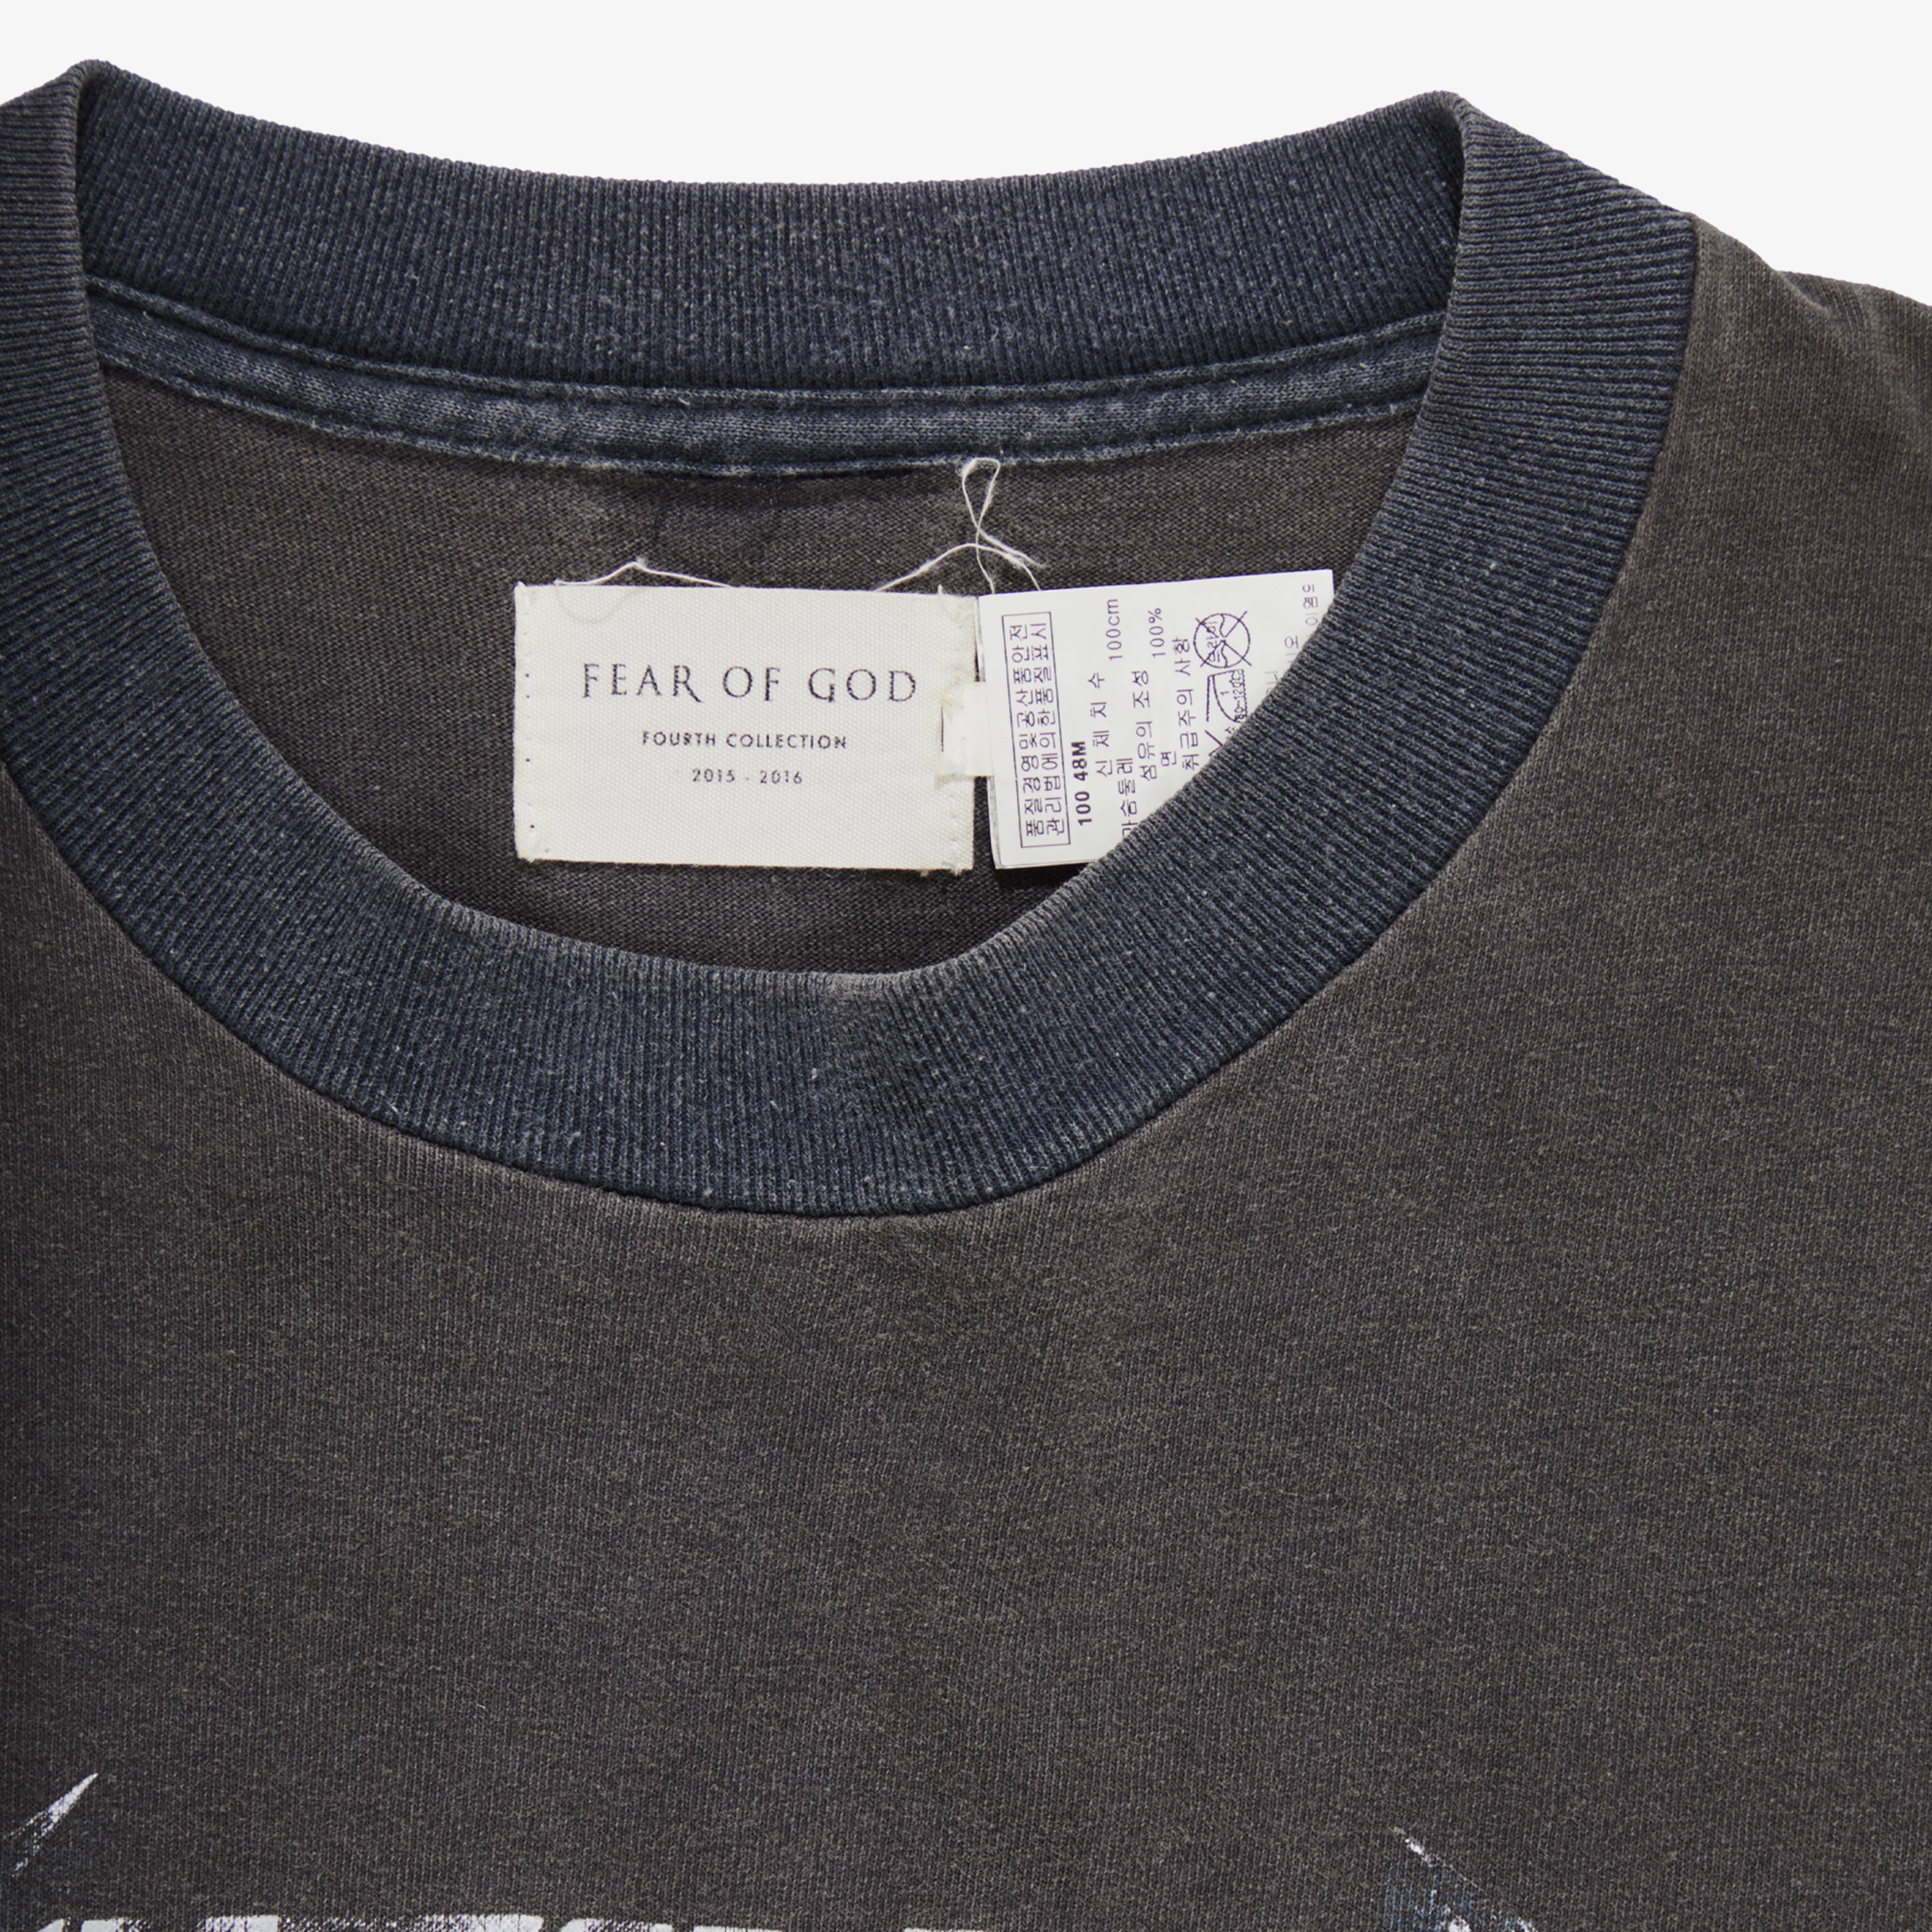 FEAR OF GOD 4TH COLLECTION METALLICA 1991 HISTORIC DATES TEE – OBTAIND